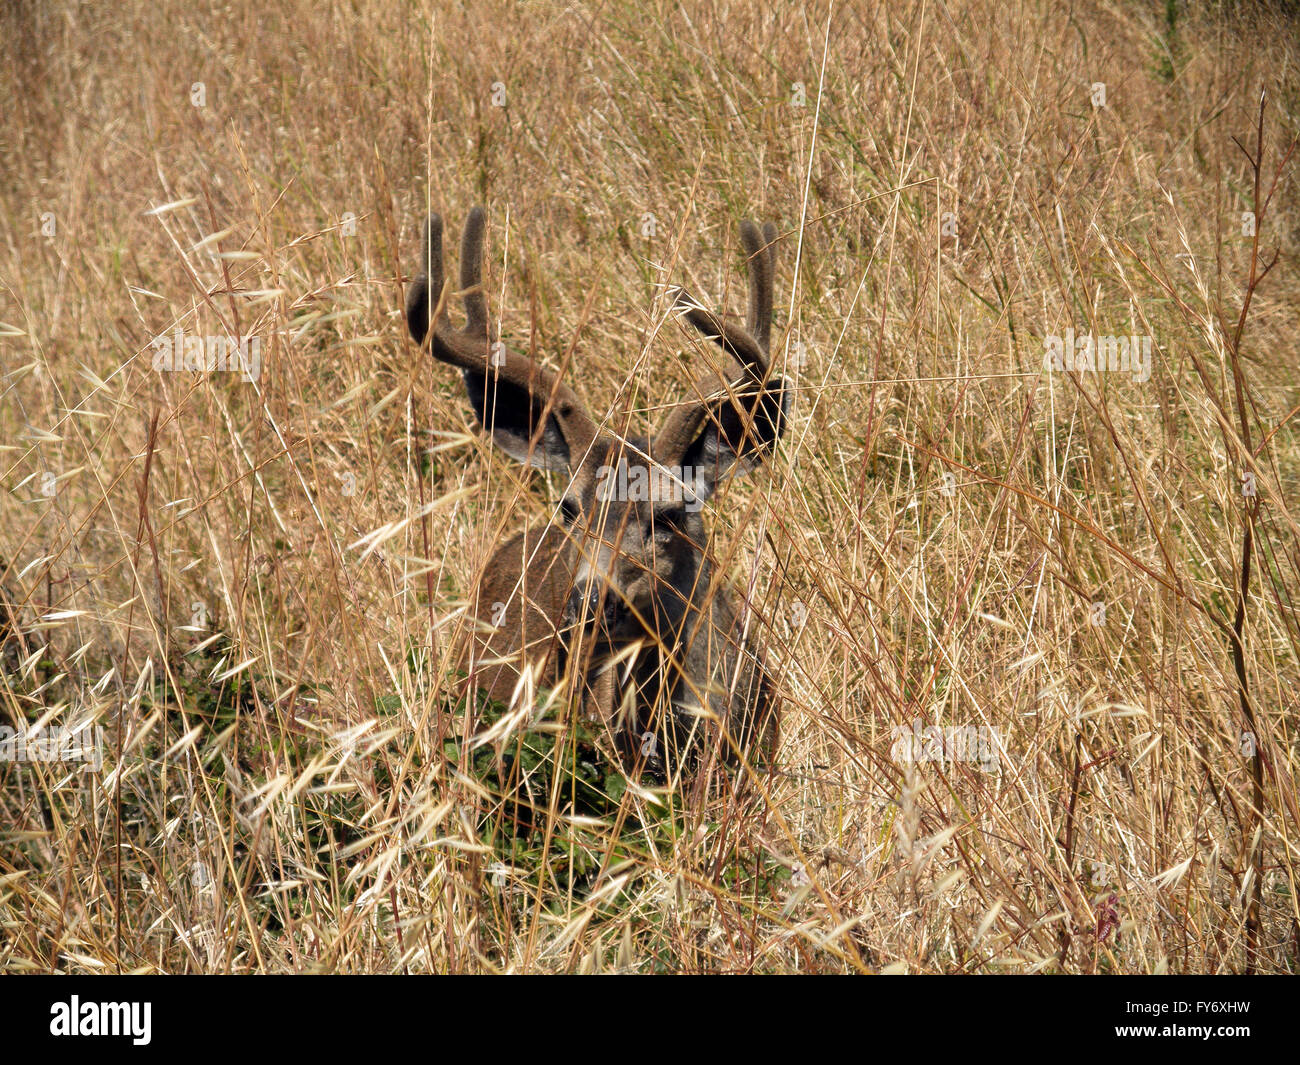 Black-tailed Deer hides in A Dry grassy Field on Angel Island in San Francisco bay Stock Photo